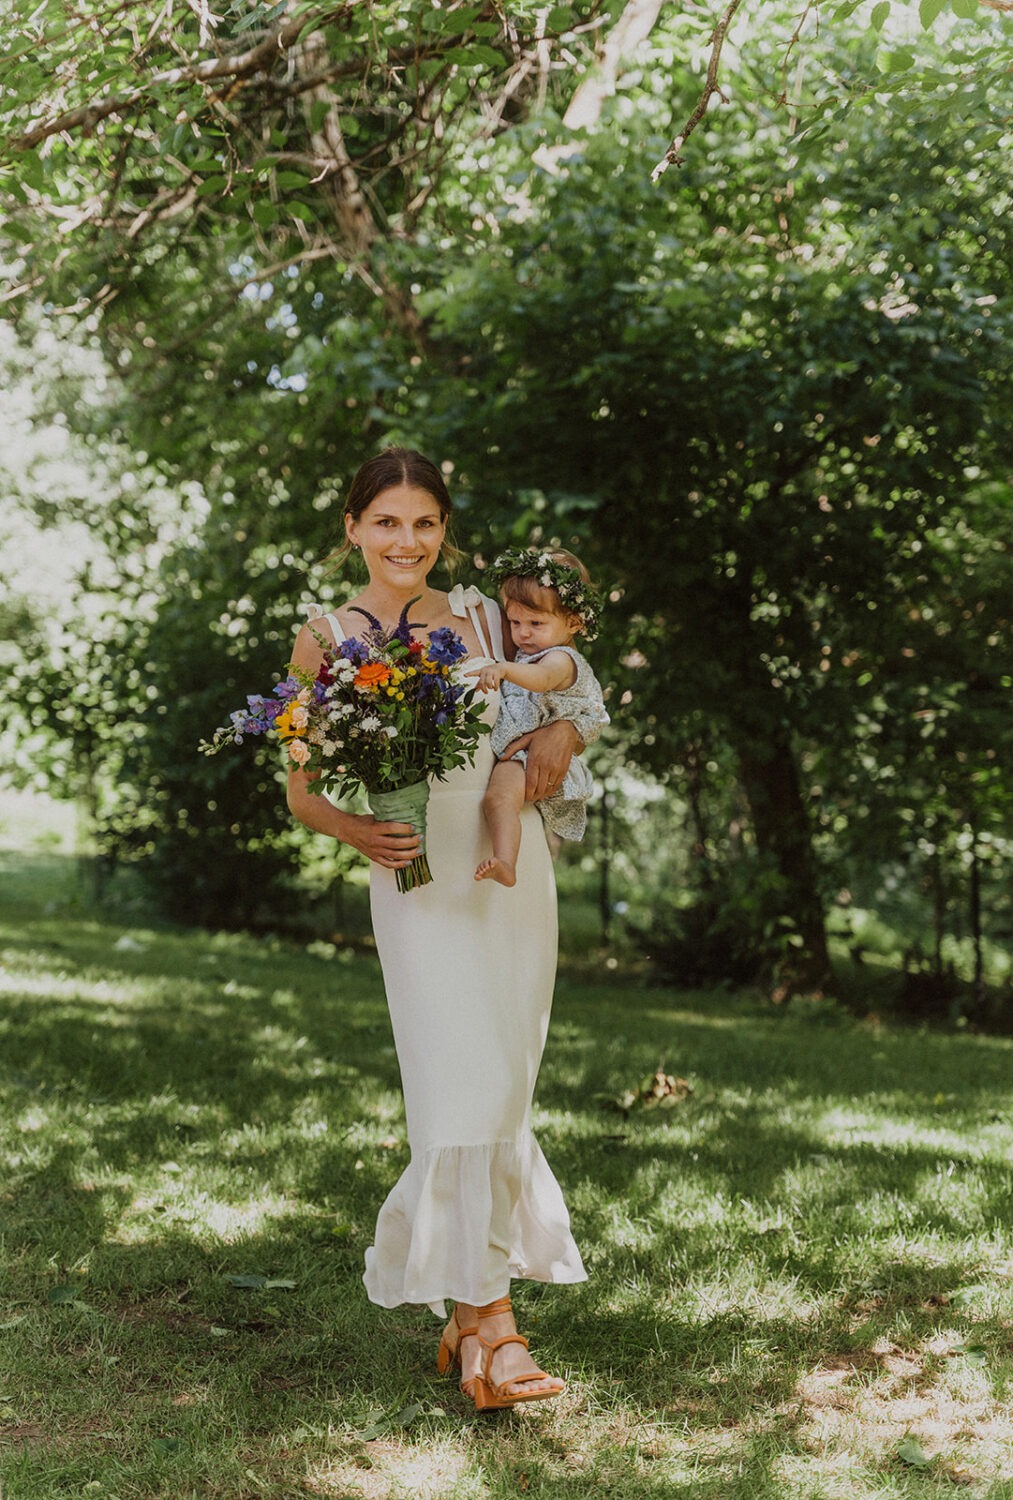 bride carries baby down aisle at outdoor rustic wedding